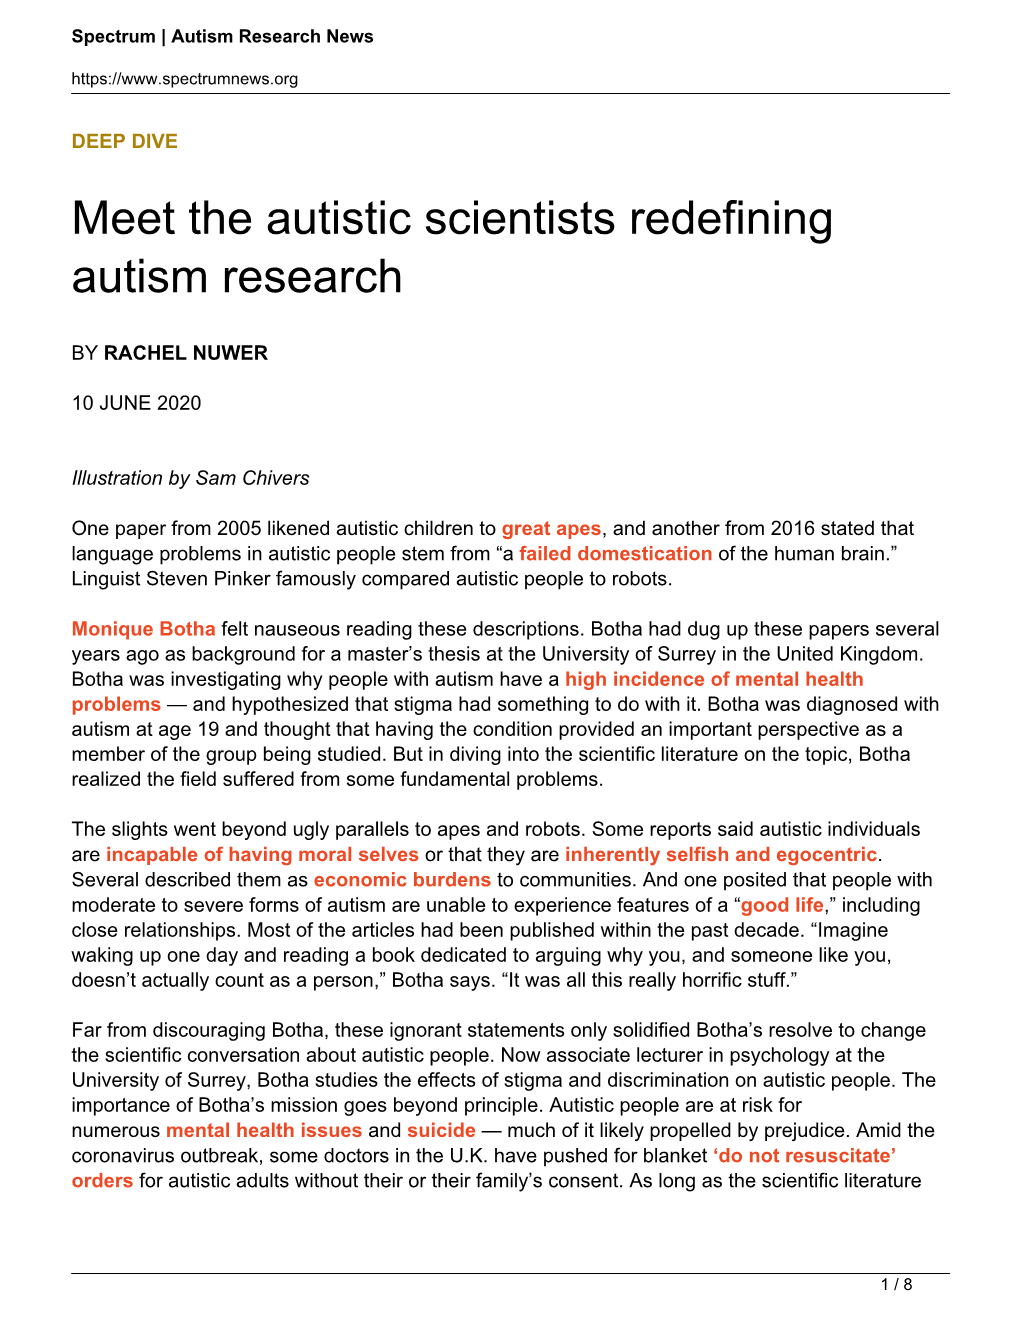 Meet the Autistic Scientists Redefining Autism Research